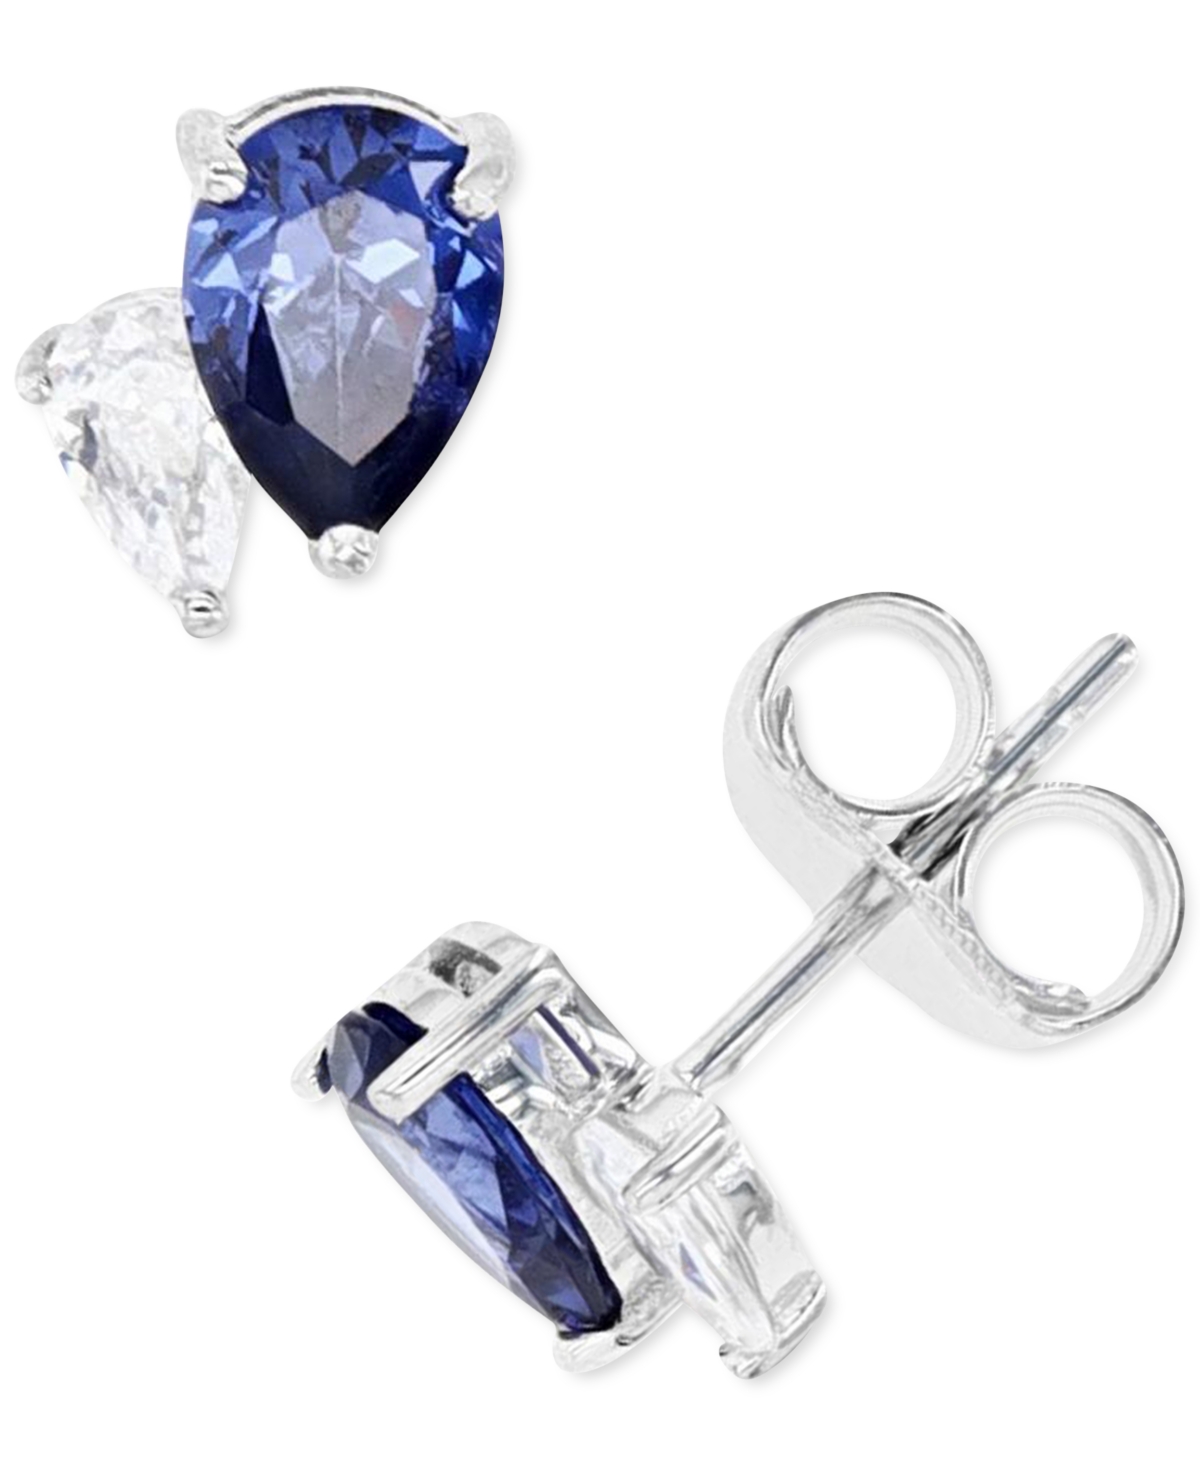 Macy's Blue And White Cubic Zirconia Stud Earrings In Sterling Silver Or 14k Gold Over Sterling Silver